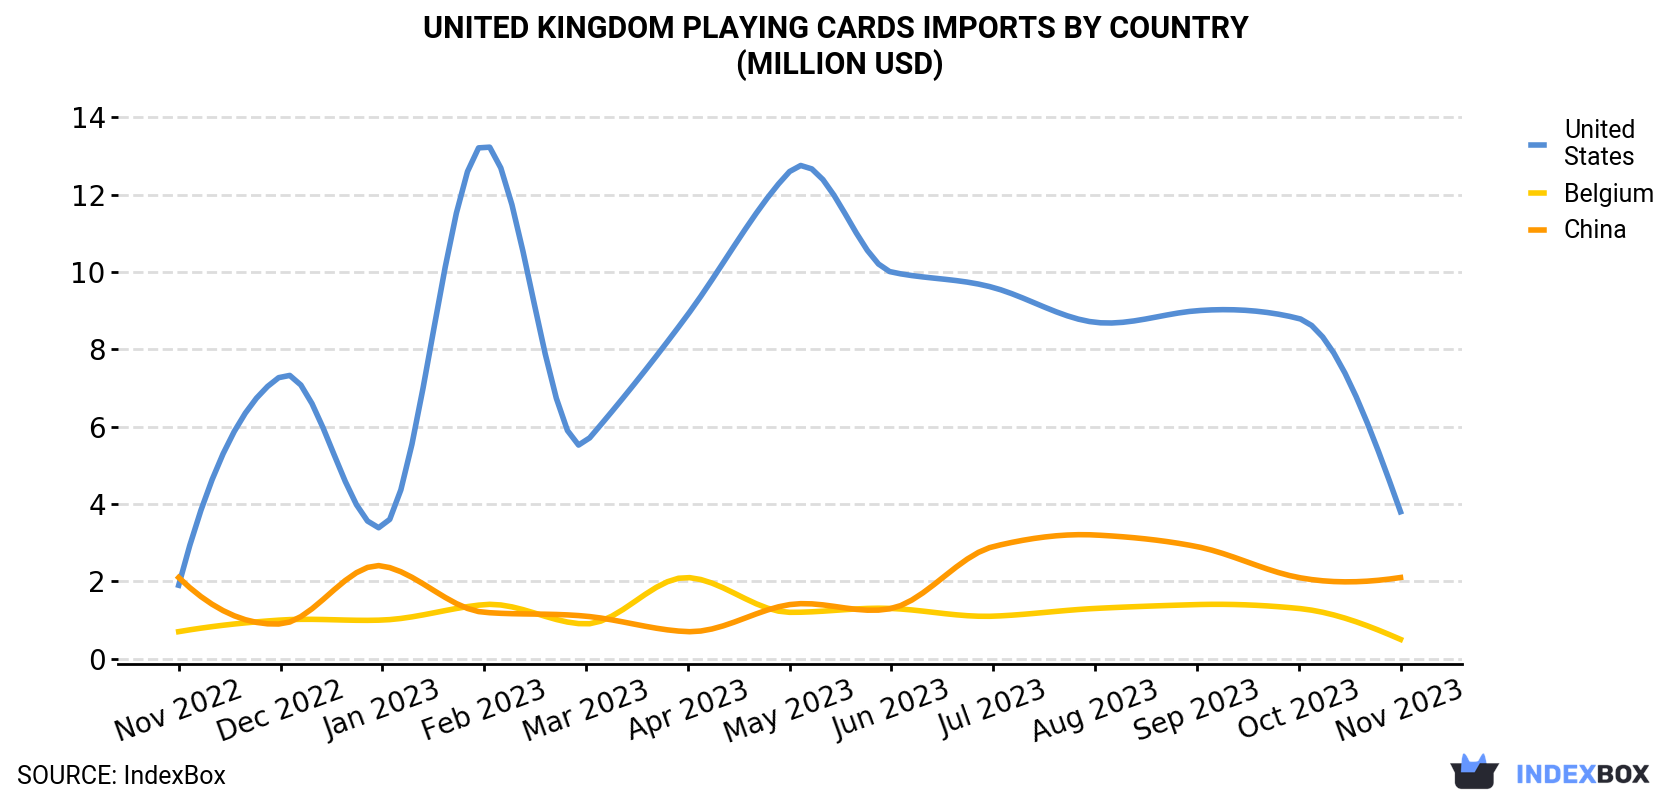 United Kingdom Playing Cards Imports By Country (Million USD)